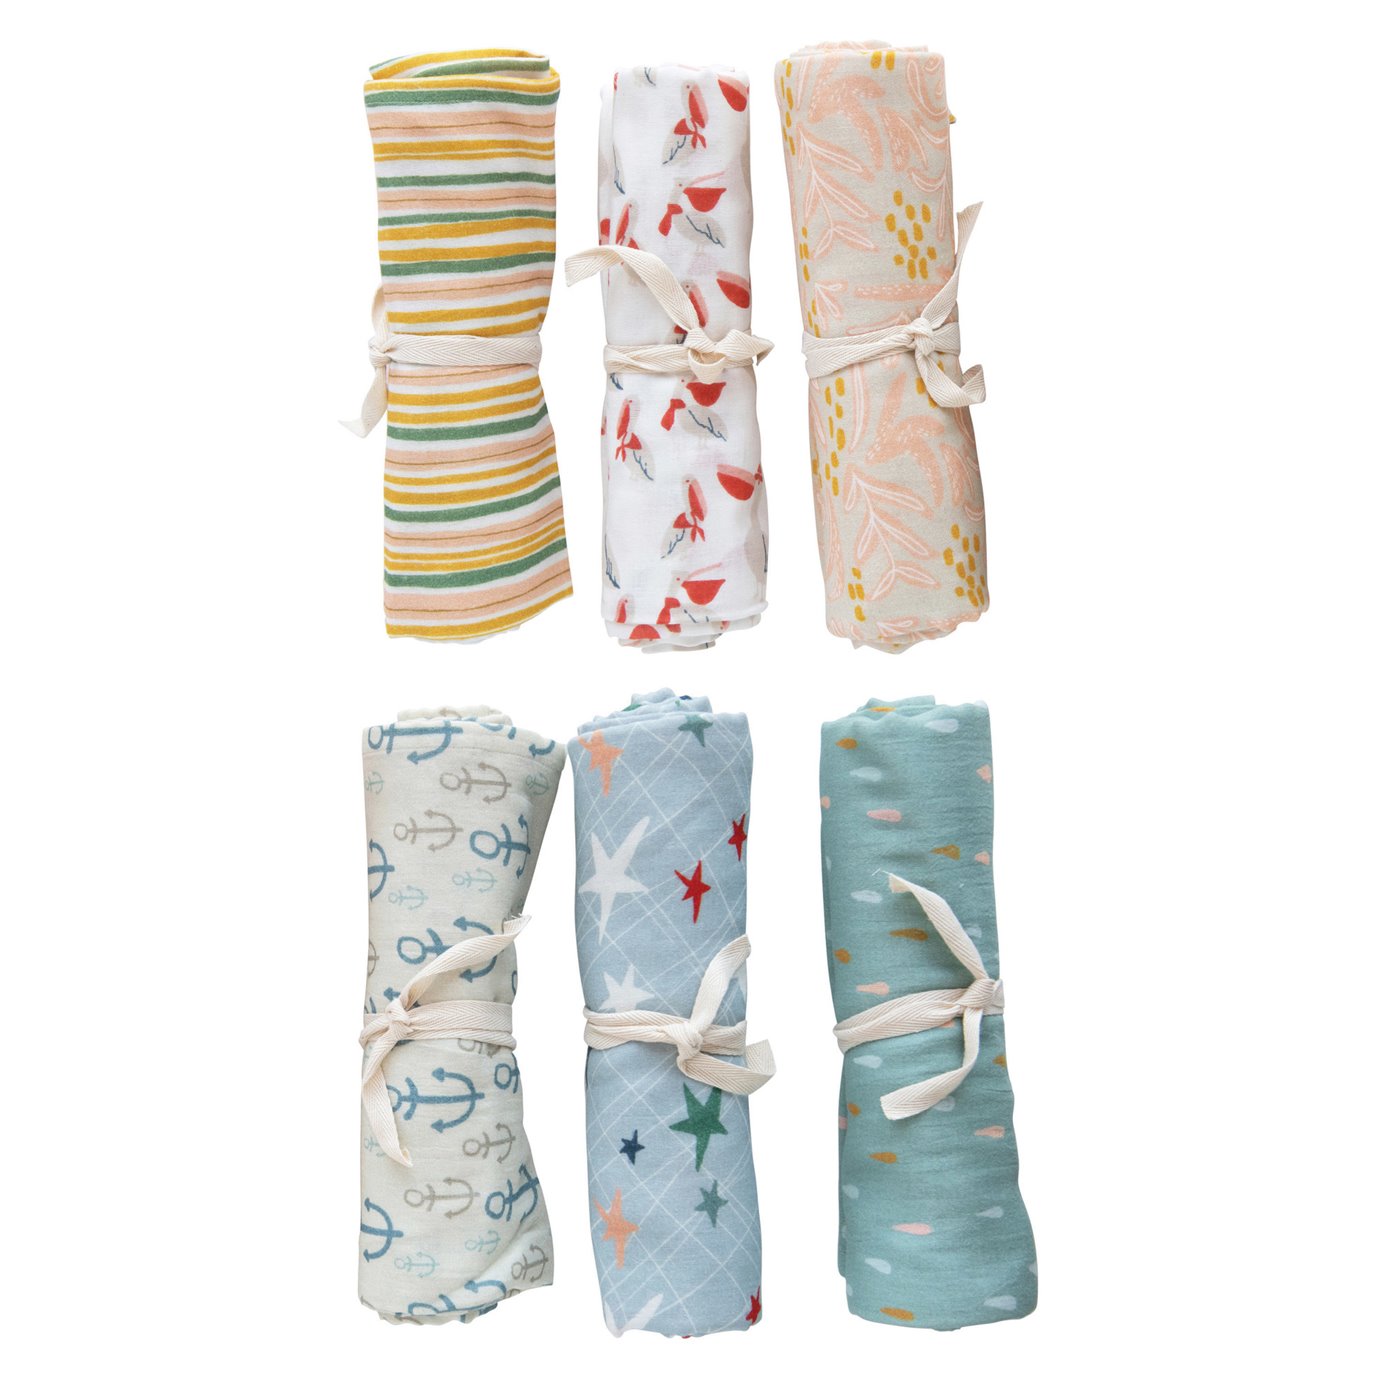 41-1/4" Square Cotton Printed Baby Swaddle, 6 Styles